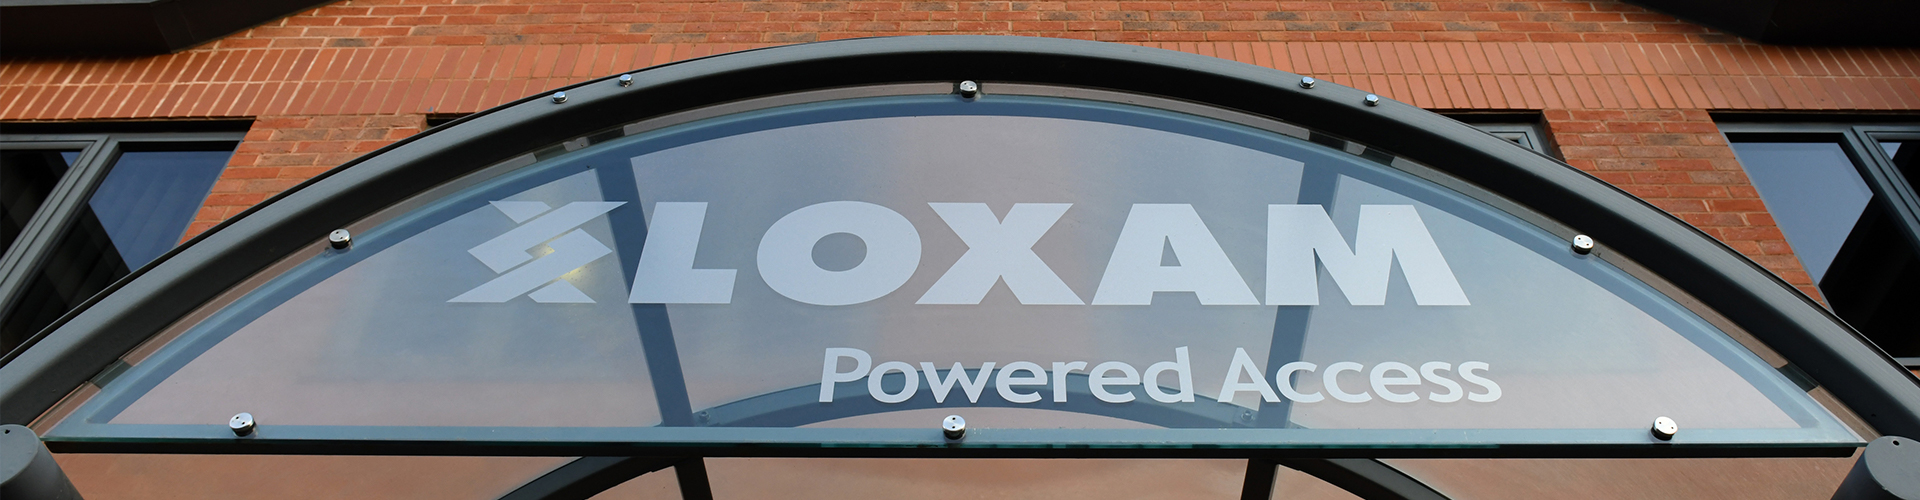 Chris Thomas Appointed Finance Director of LOXAM Powered Access Division